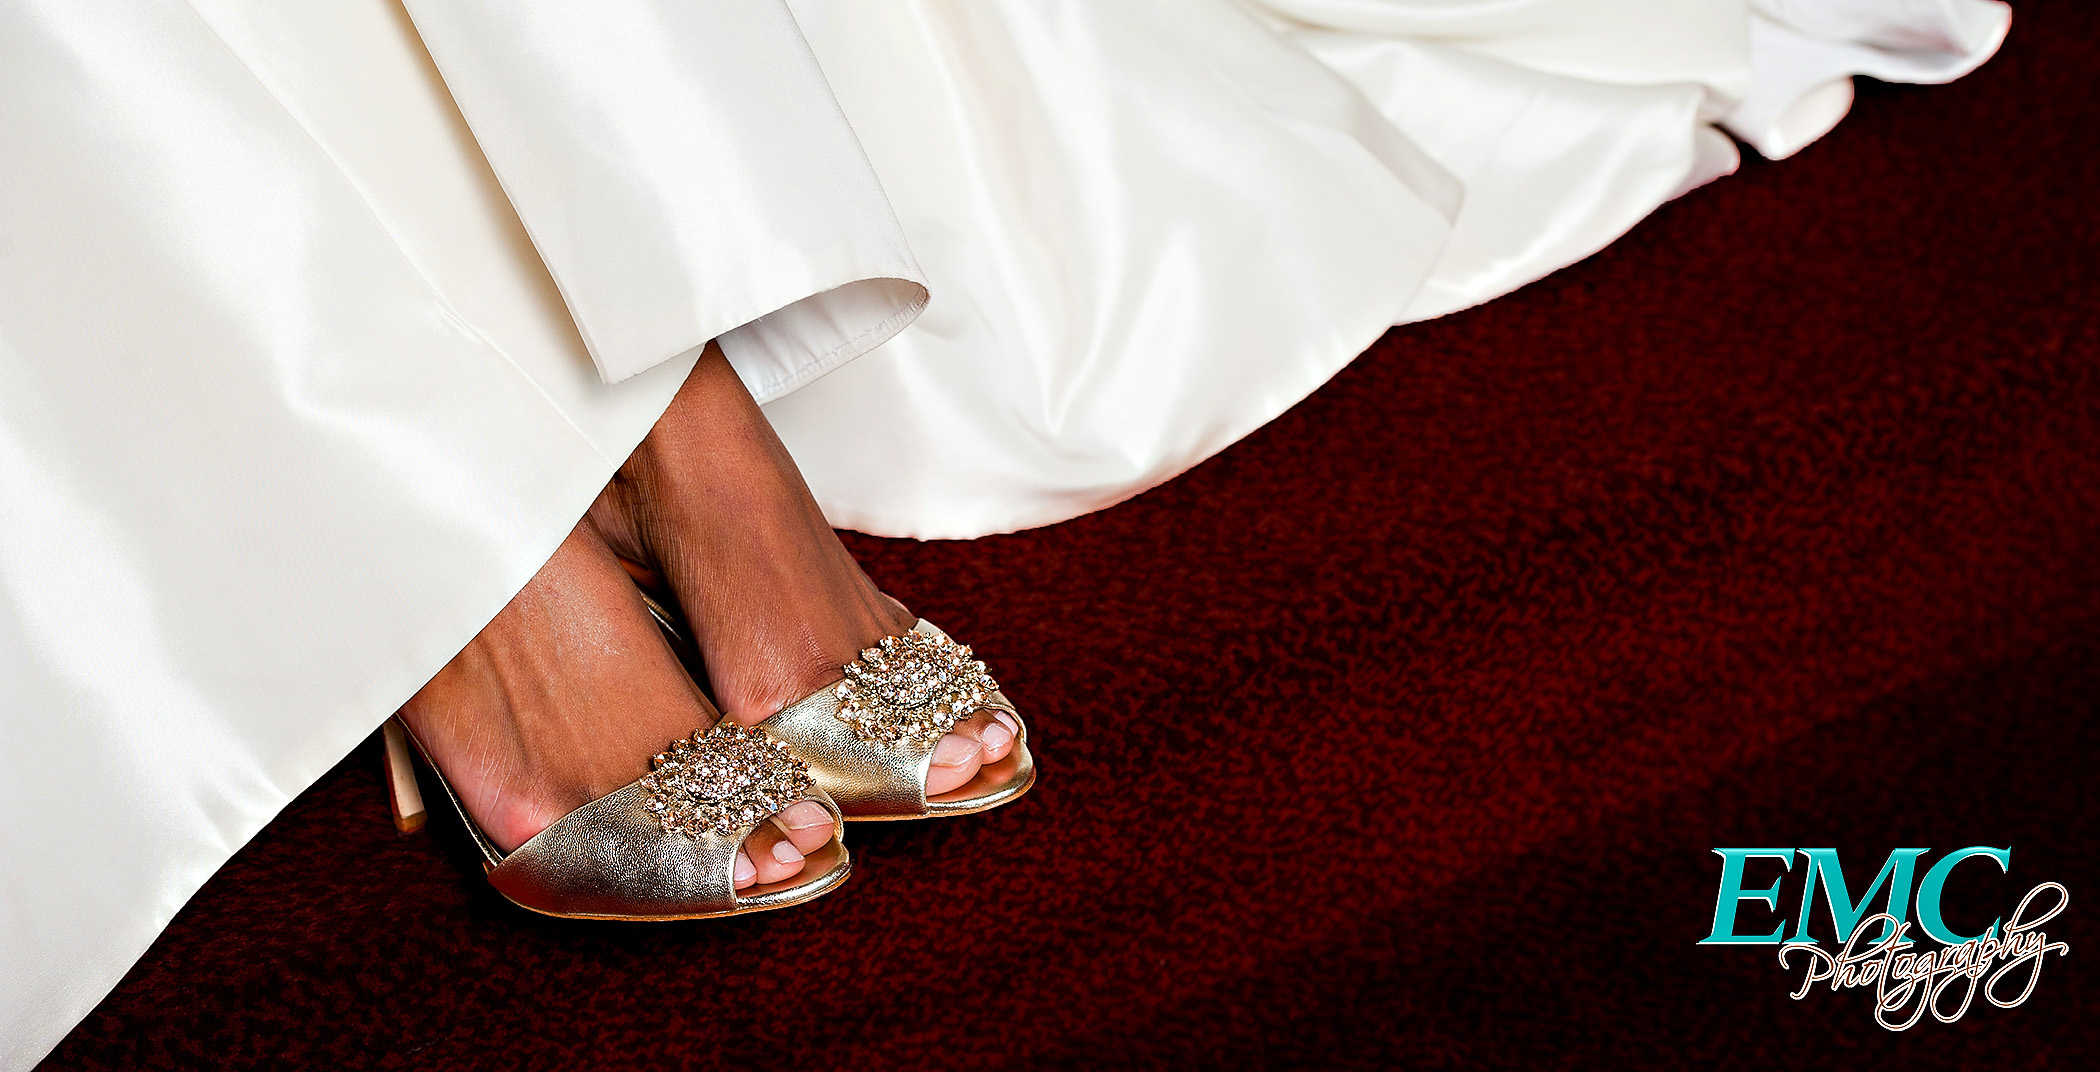 Bride shows off her pretty shoes on her wedding day, peeking out from underneath her dress